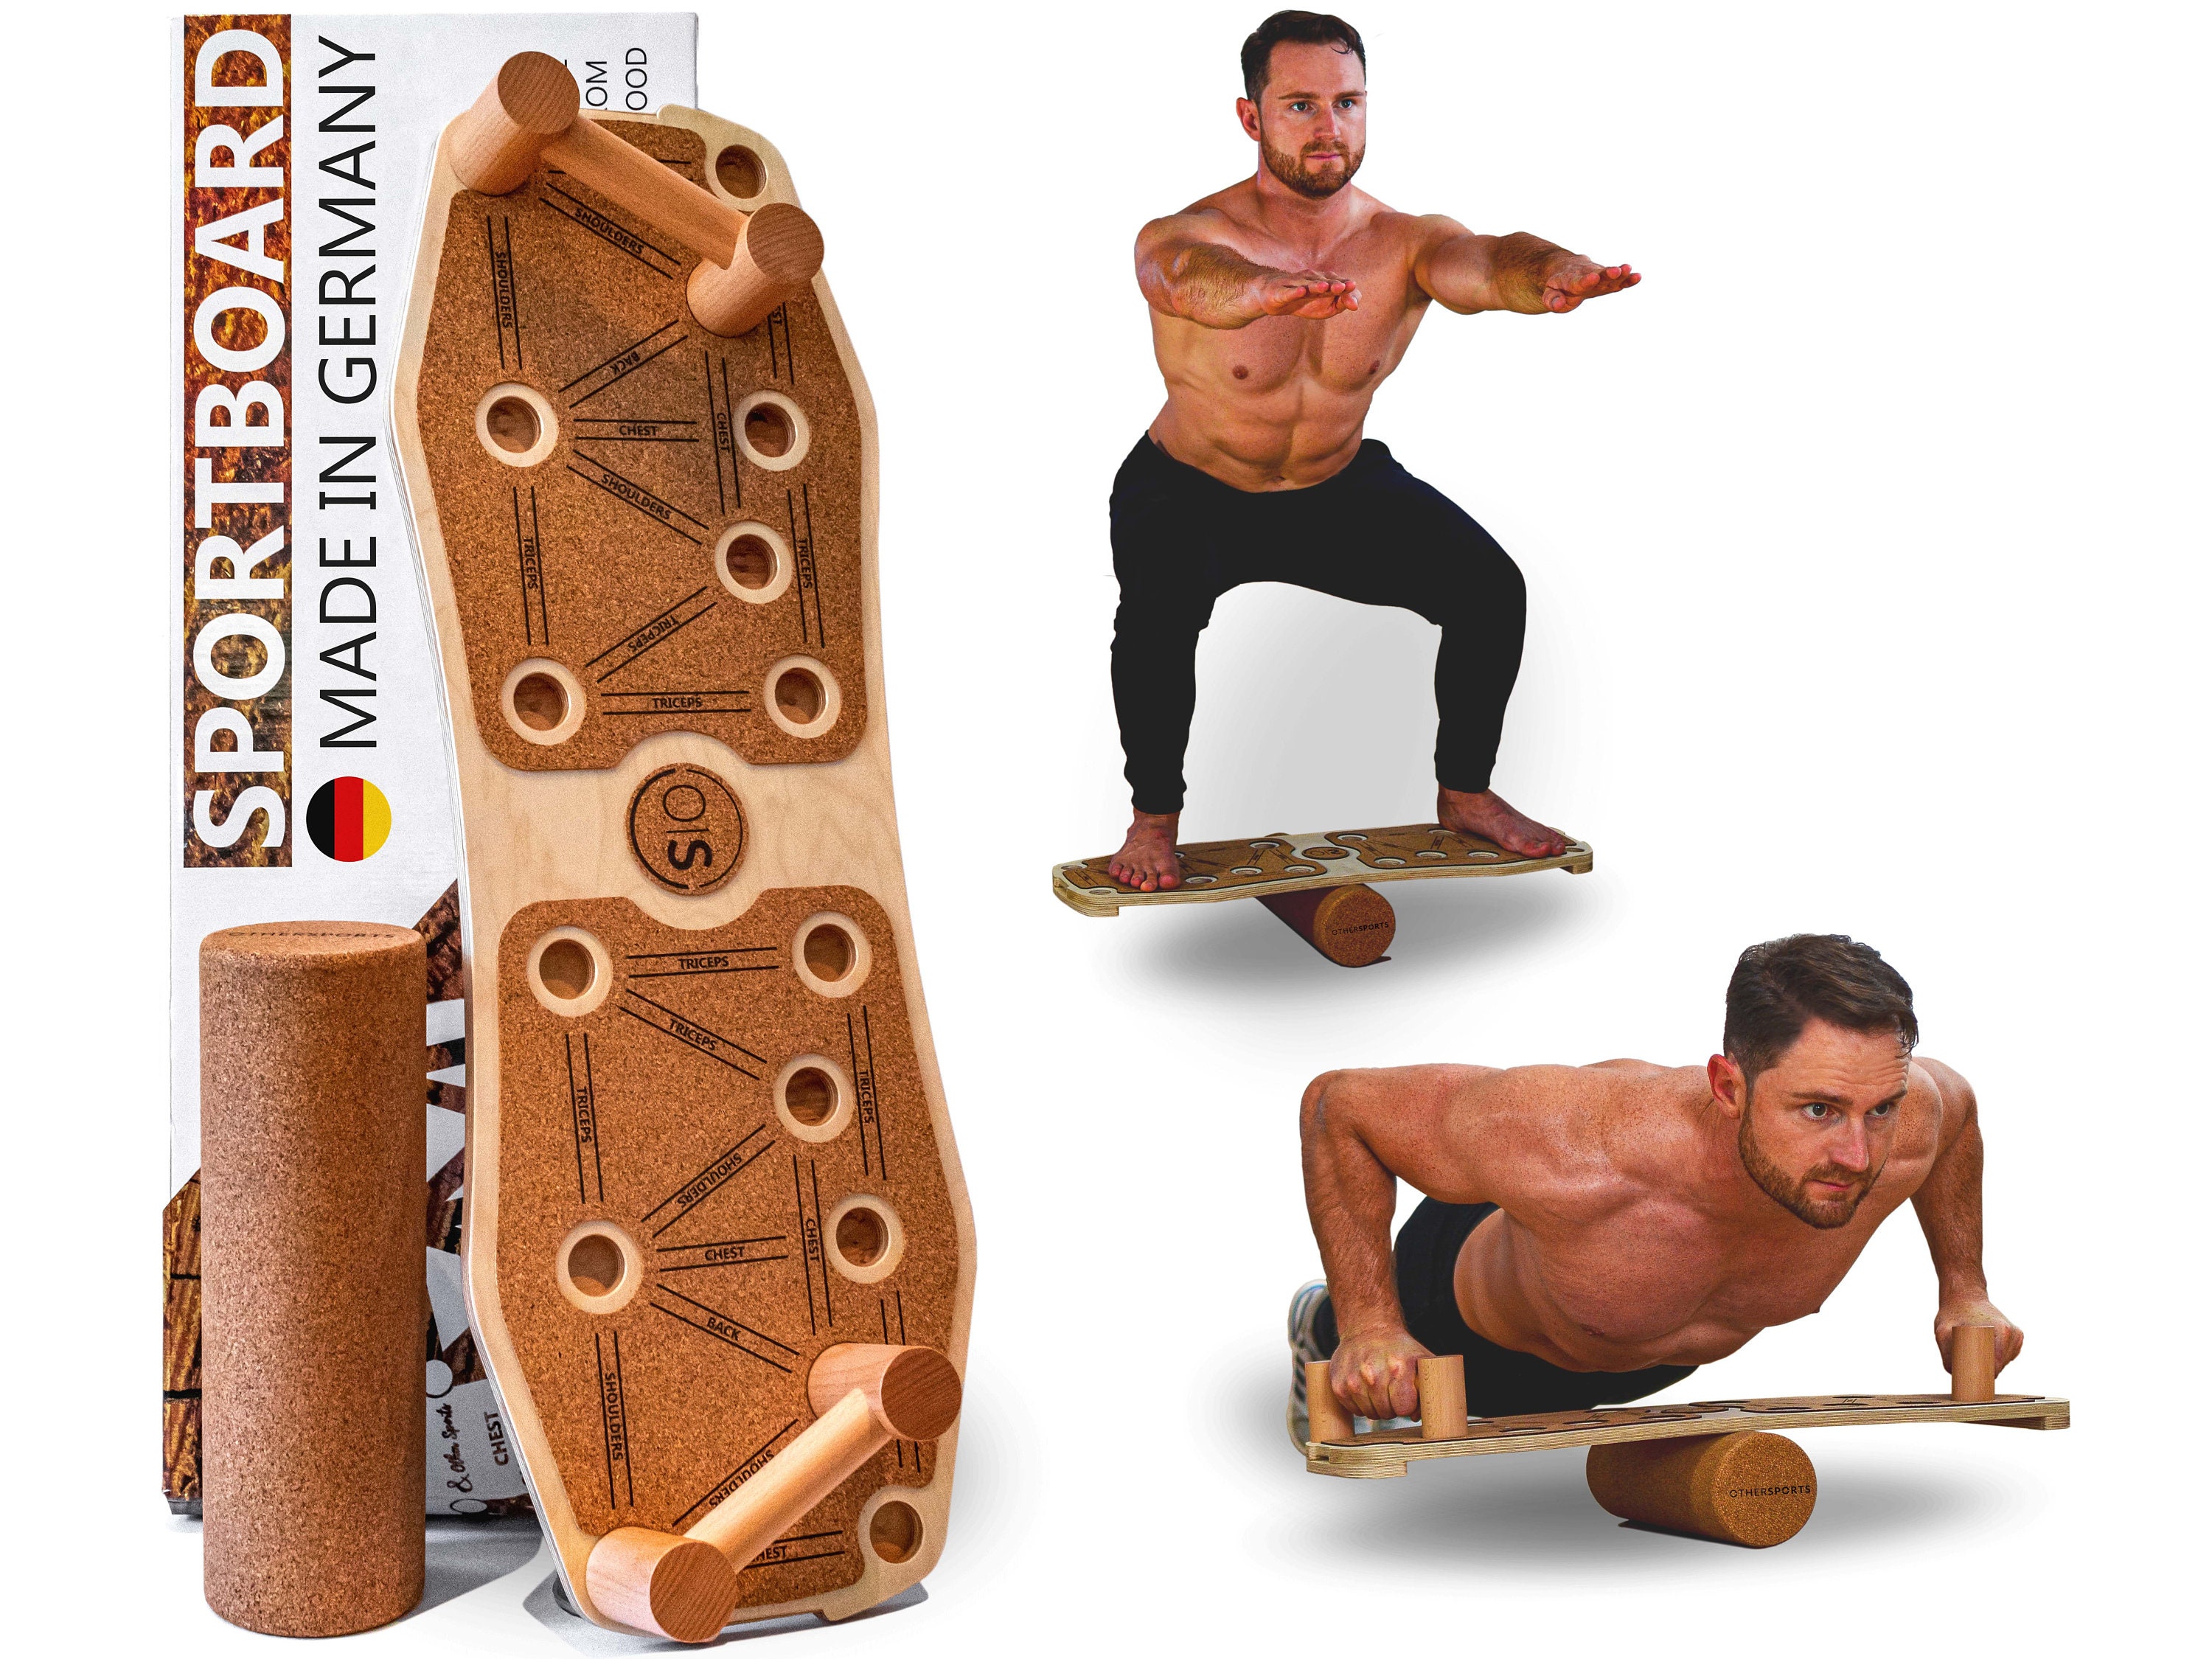 SPORTBOARD Handmade Fitness Equipment Made of 100% Real Wood picture